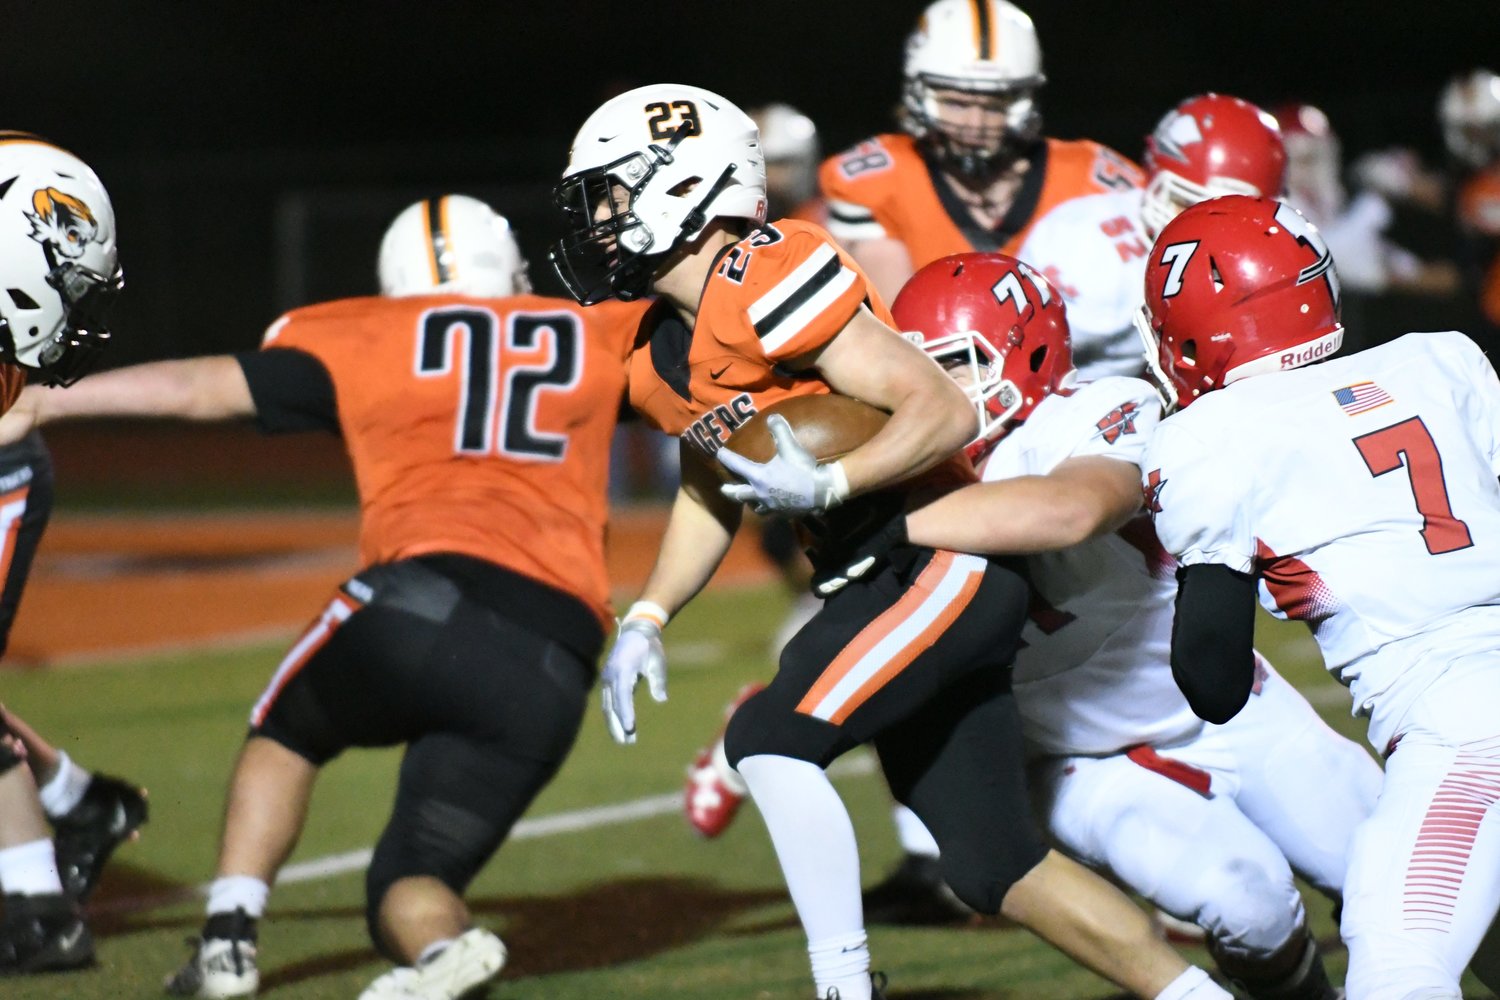 Action from Friday's district football clash between Kirksville and Warrenton